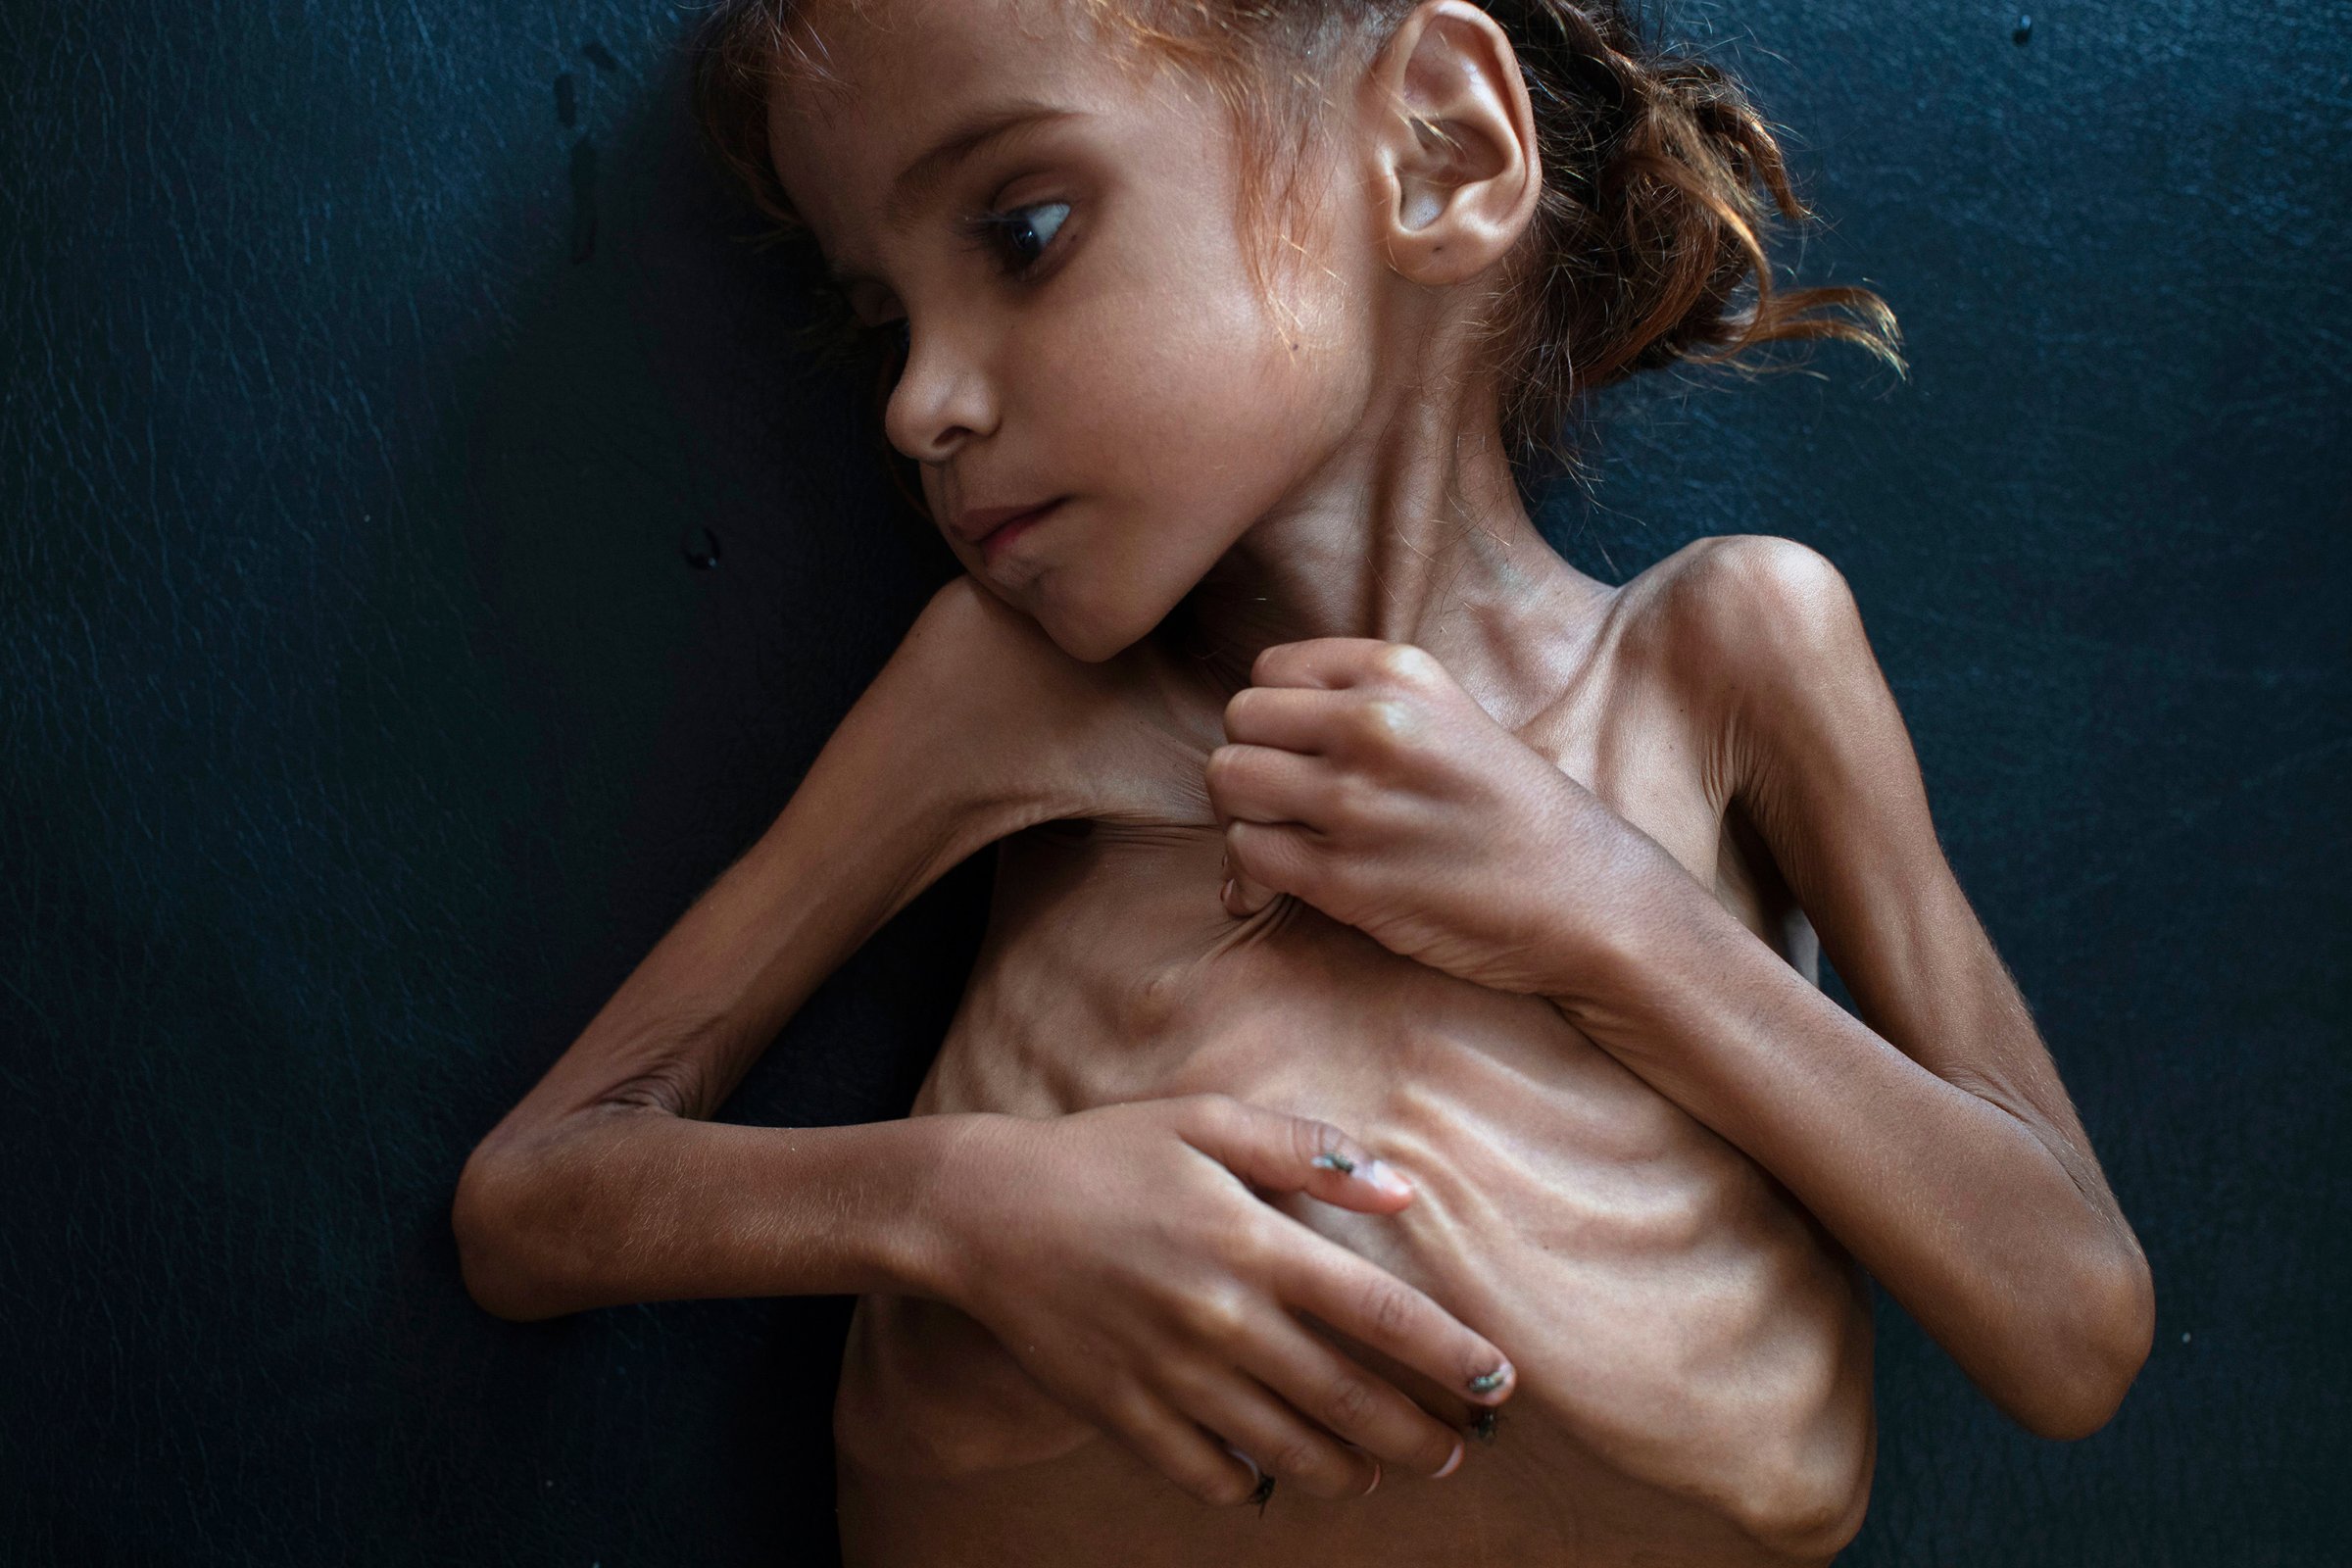 This image of 7-year-old Amal Hussain in October drew global attention to the humanitarian crisis